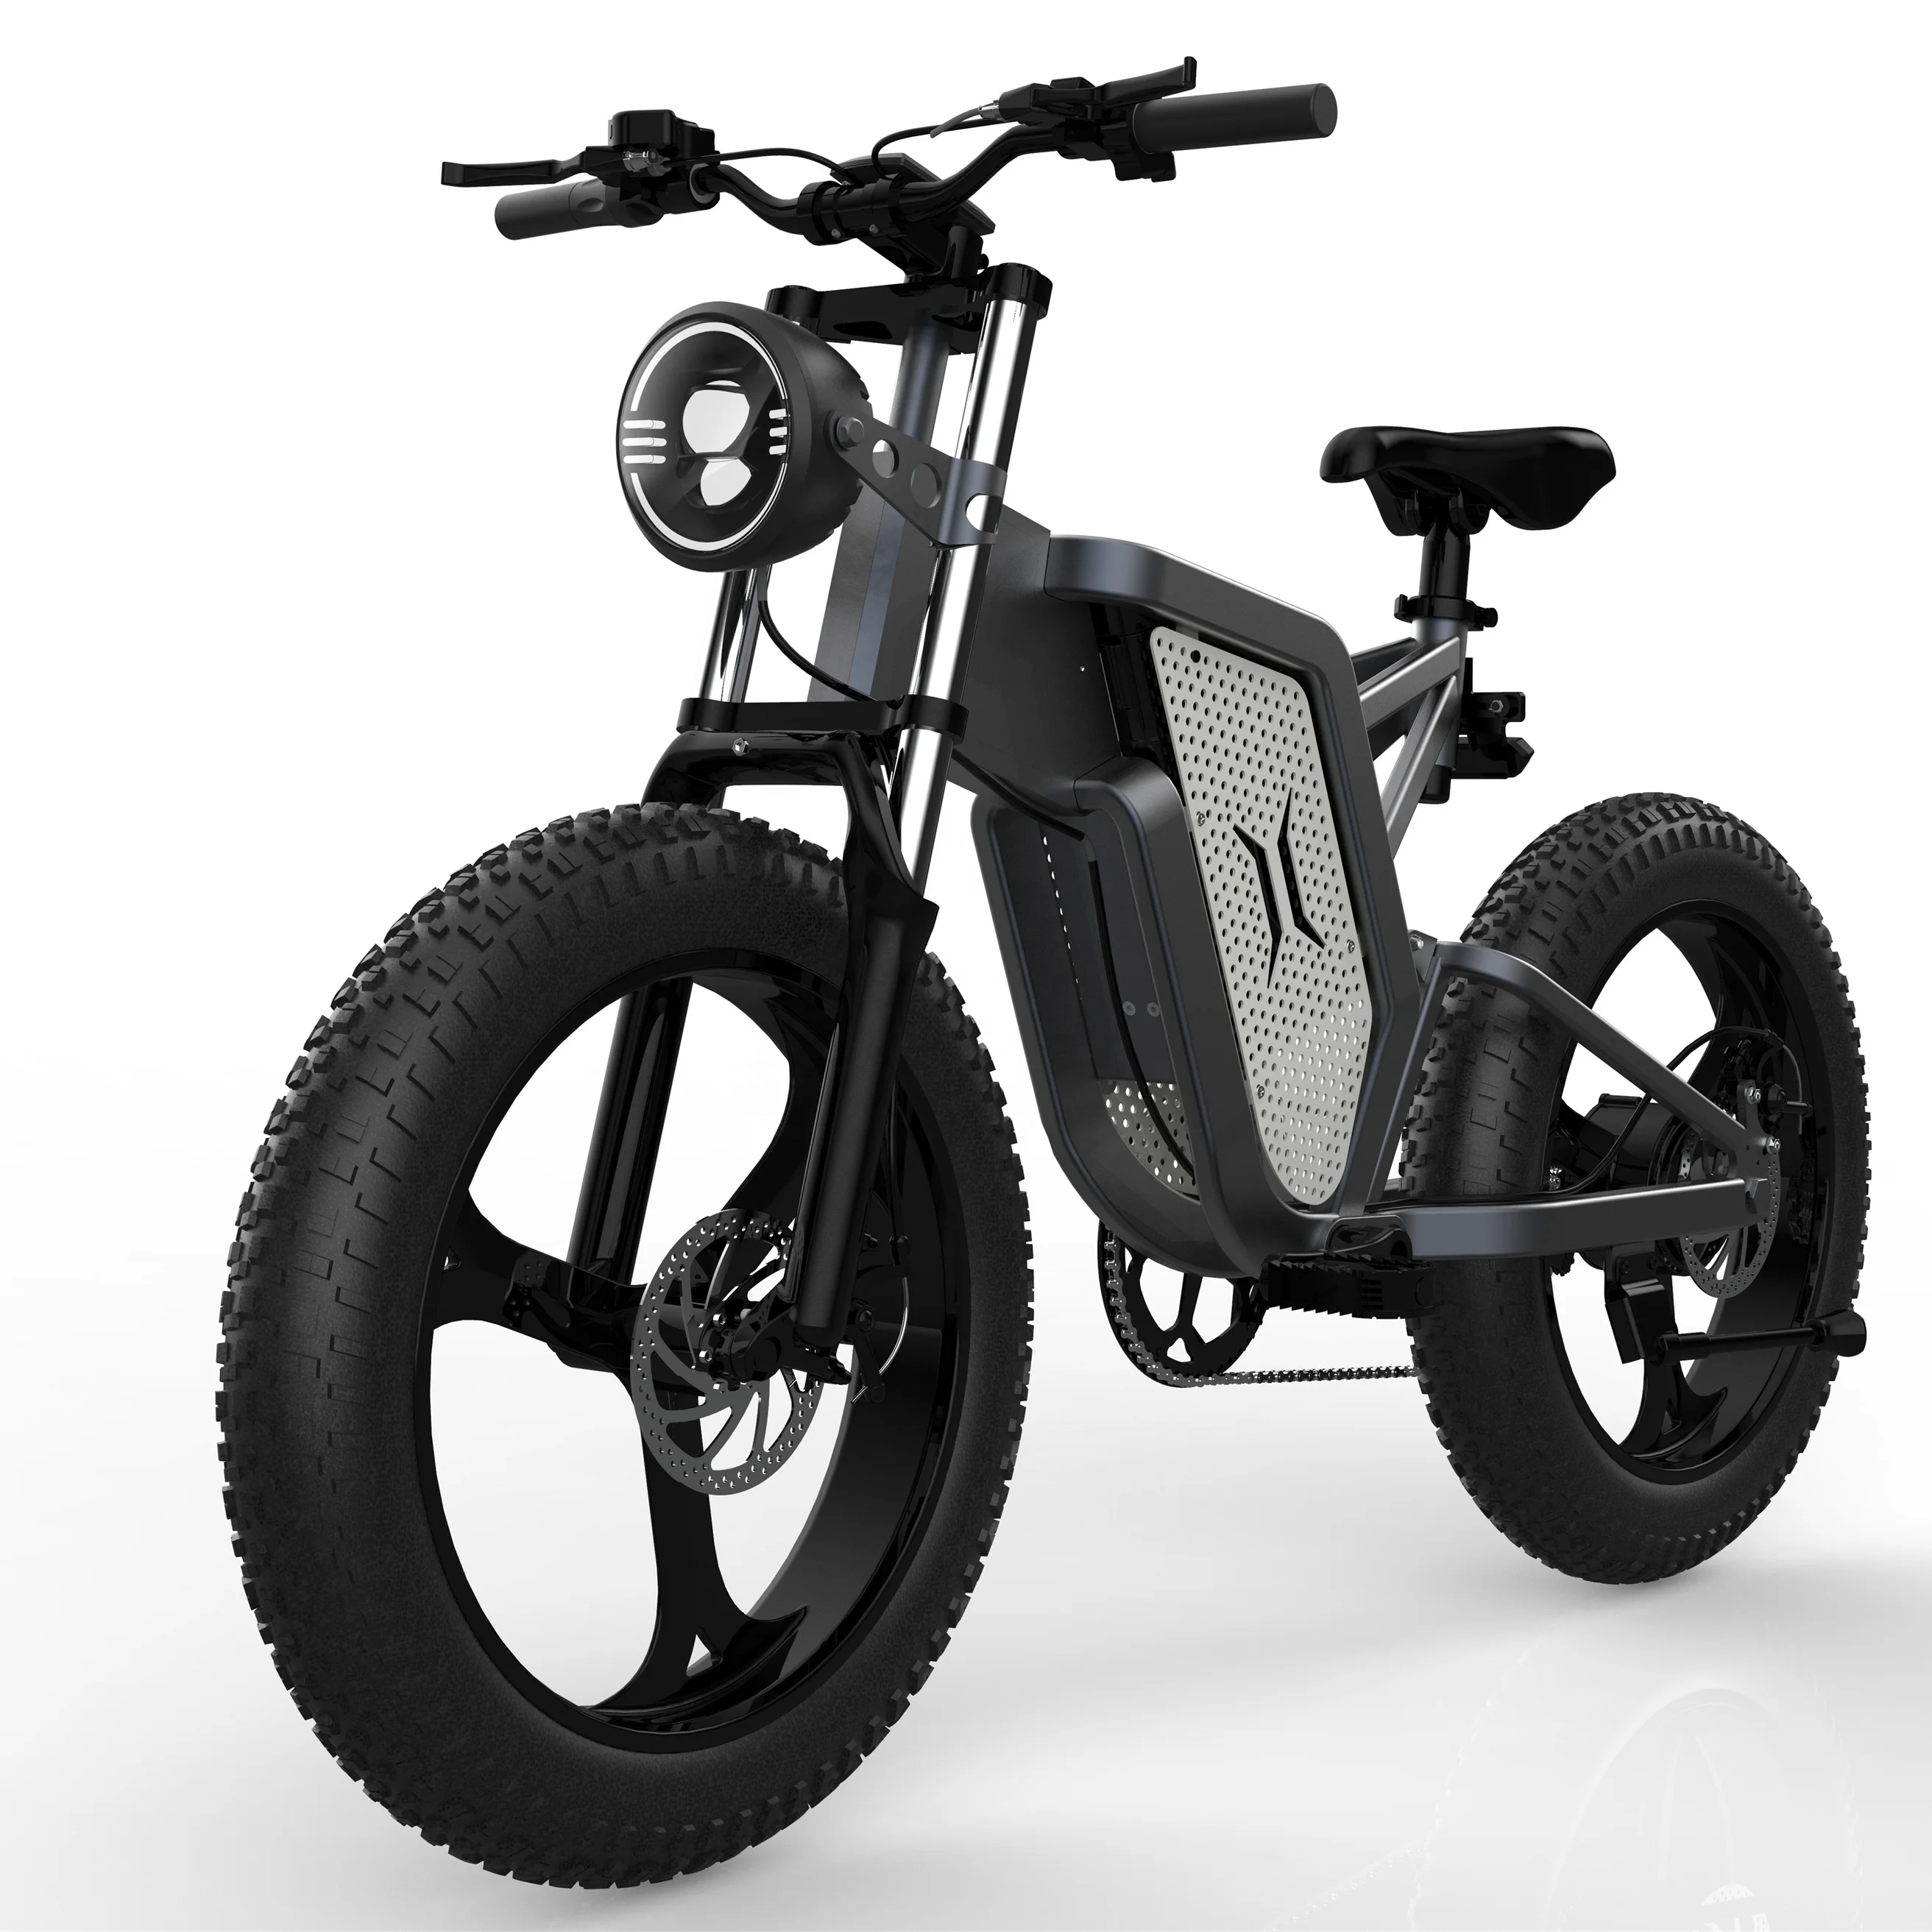 

Hot Selling Ebike Wholesales Sport Good Retail 500w Electric Bicycle Fast Speed E Bike Manufacturer 100NM Electric Mountain Bike